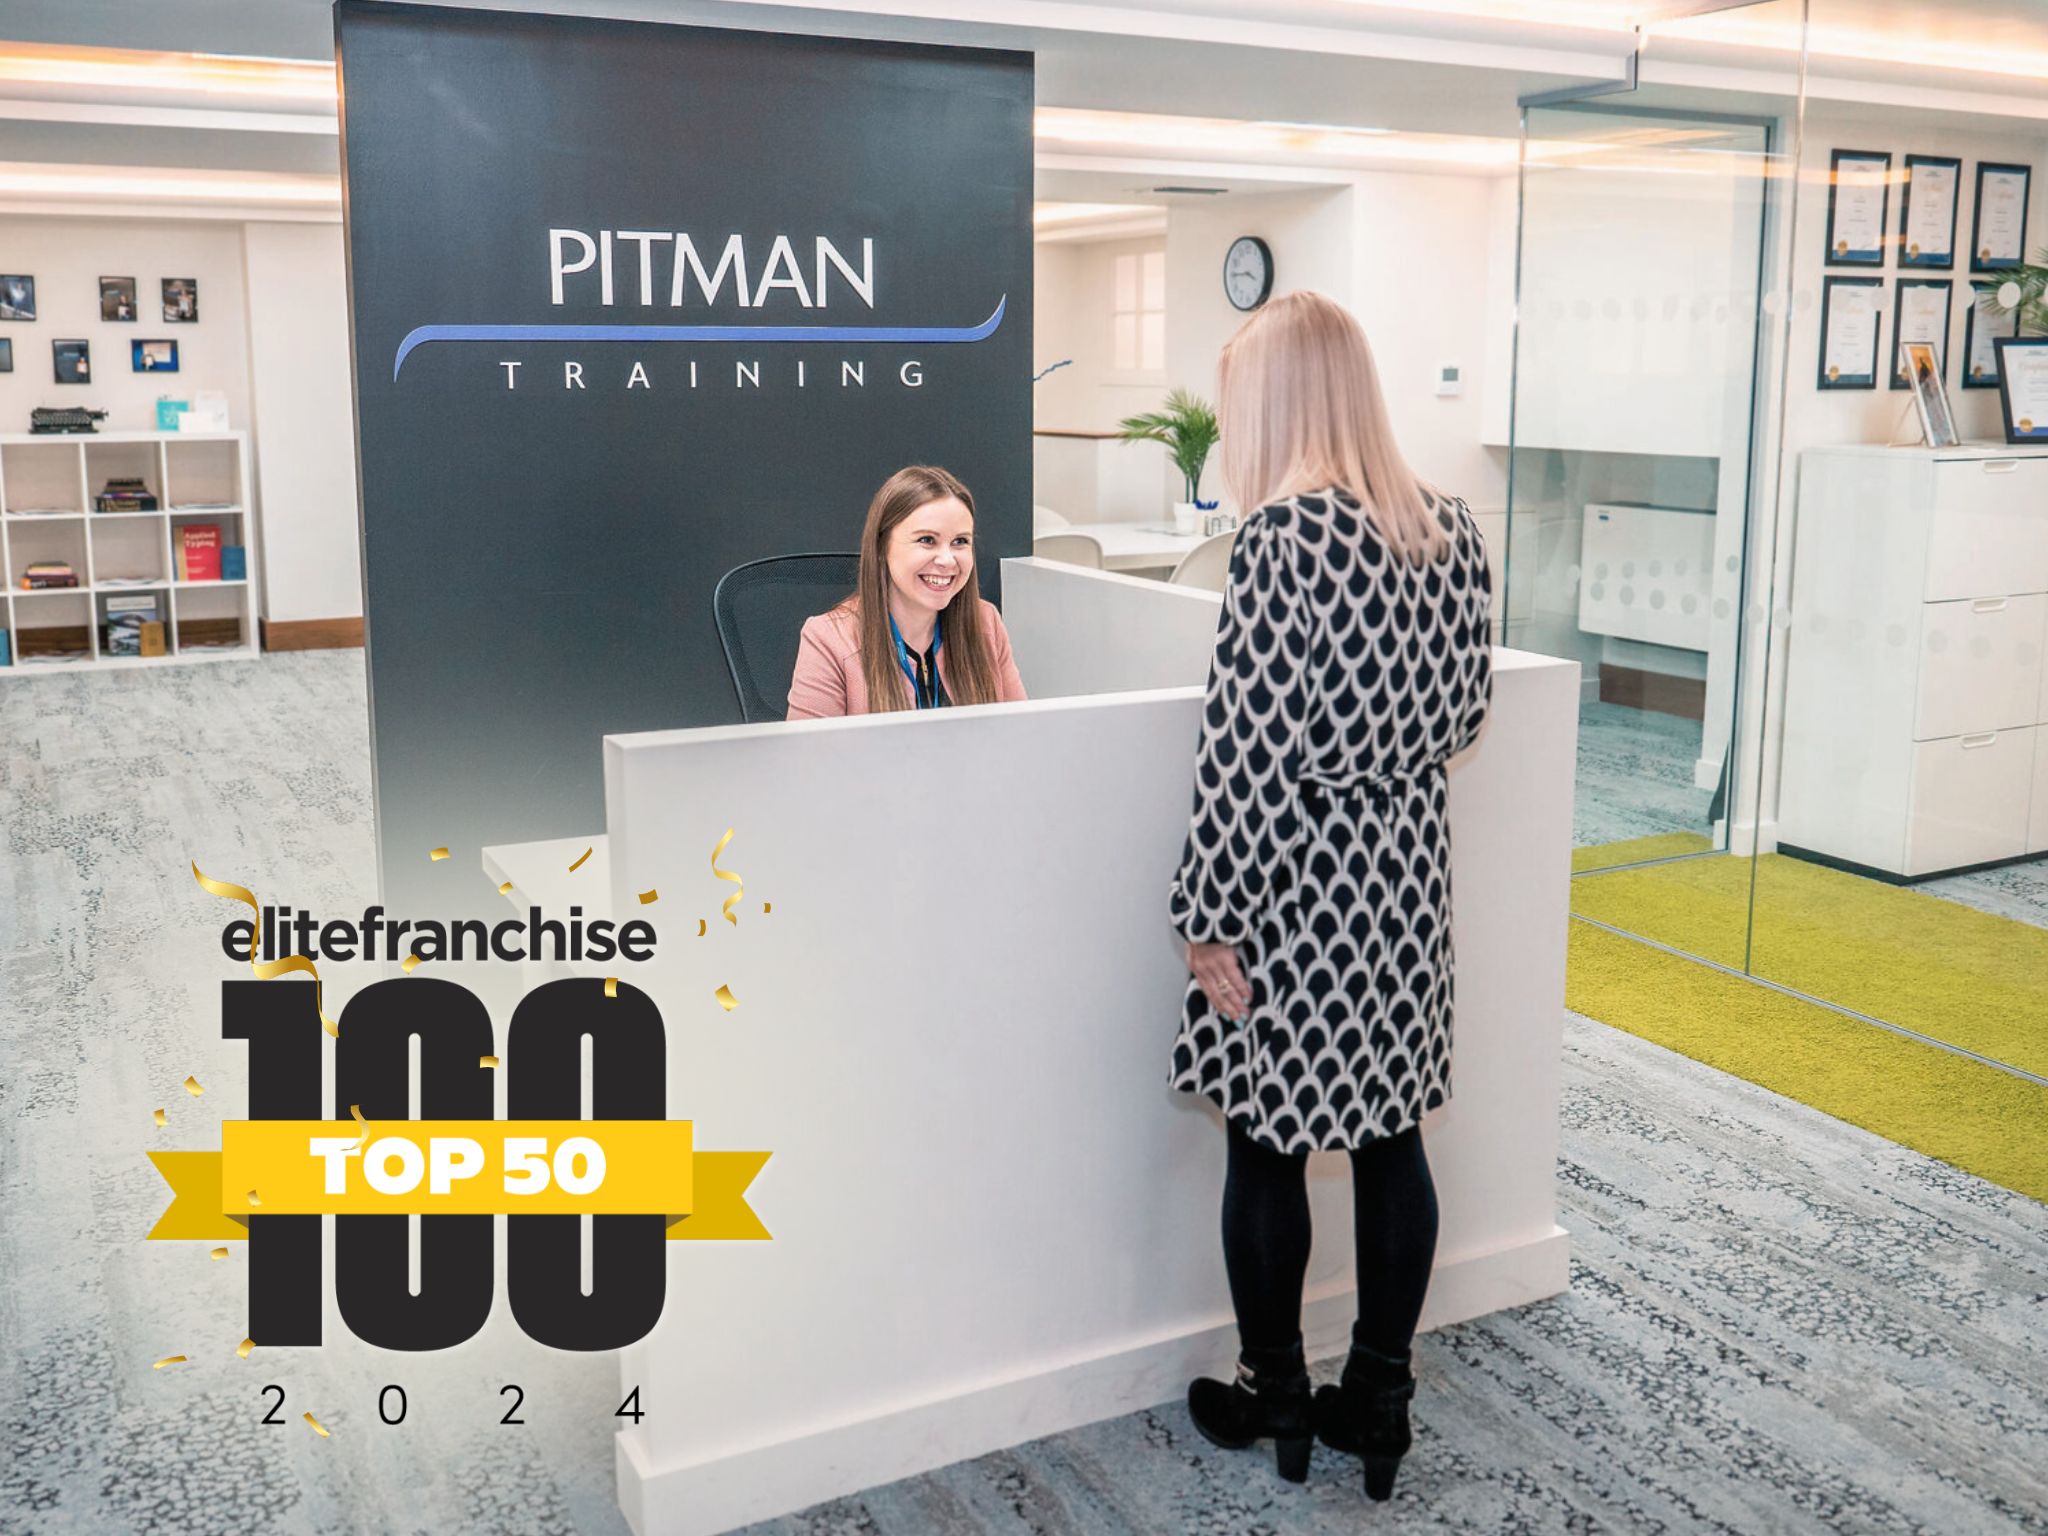 Pitman Training Future Plans for Expansion and Excellence